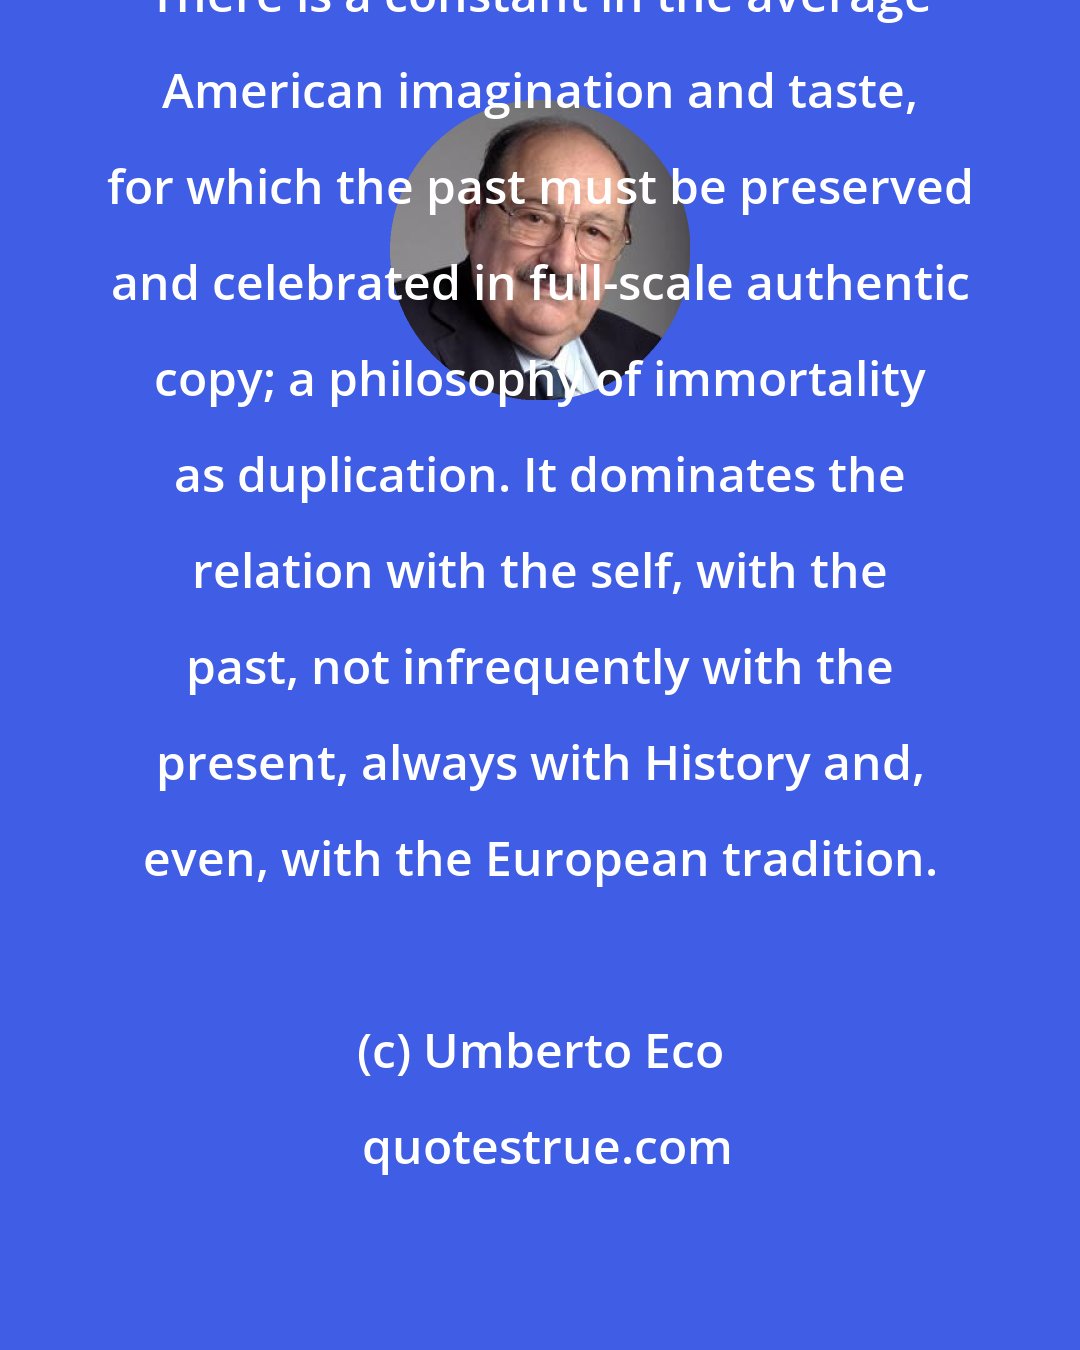 Umberto Eco: There is a constant in the average American imagination and taste, for which the past must be preserved and celebrated in full-scale authentic copy; a philosophy of immortality as duplication. It dominates the relation with the self, with the past, not infrequently with the present, always with History and, even, with the European tradition.